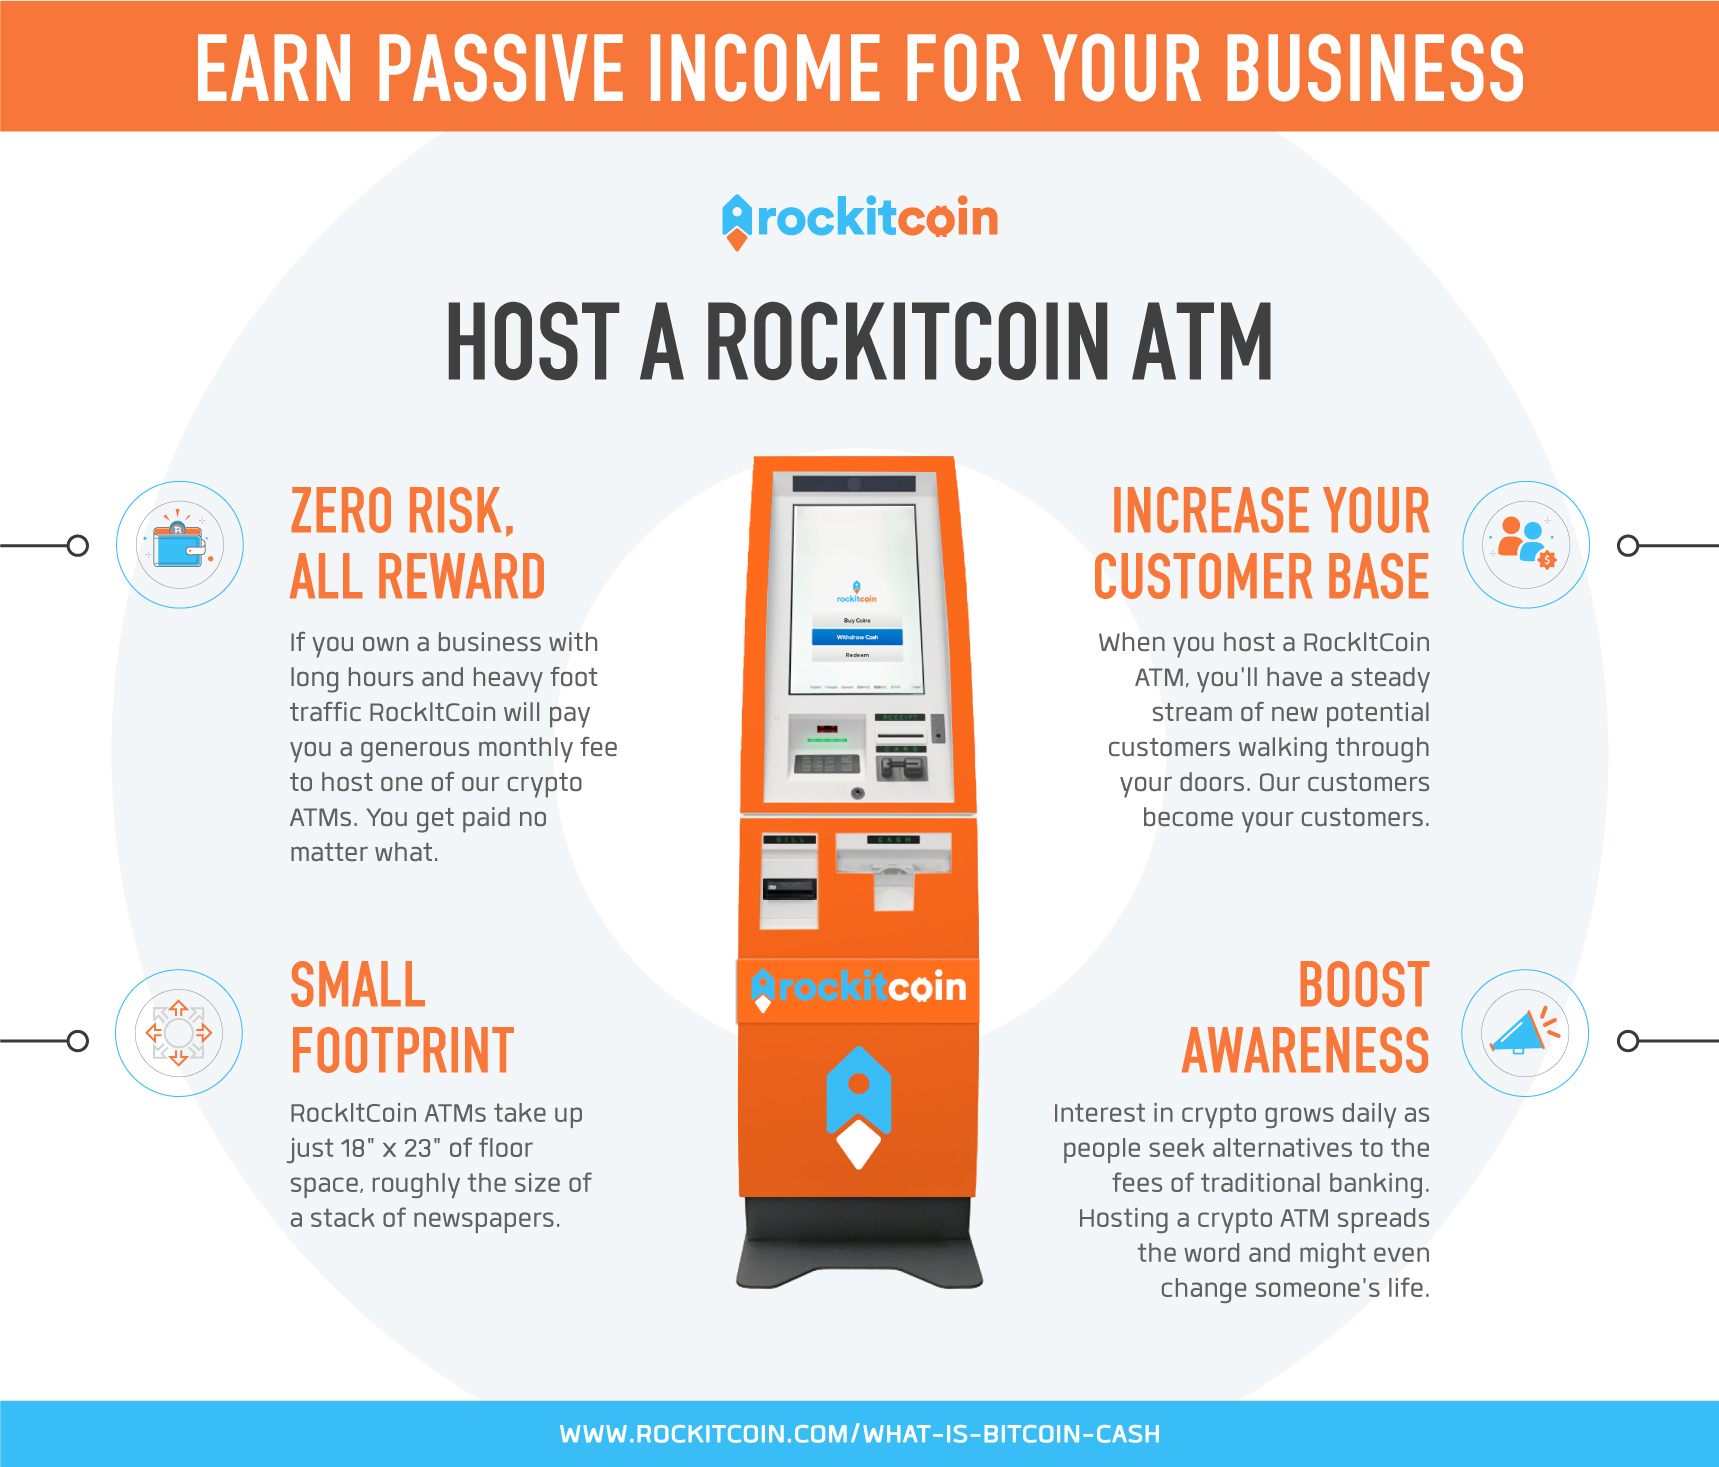 Host A Rockitcoin ATM